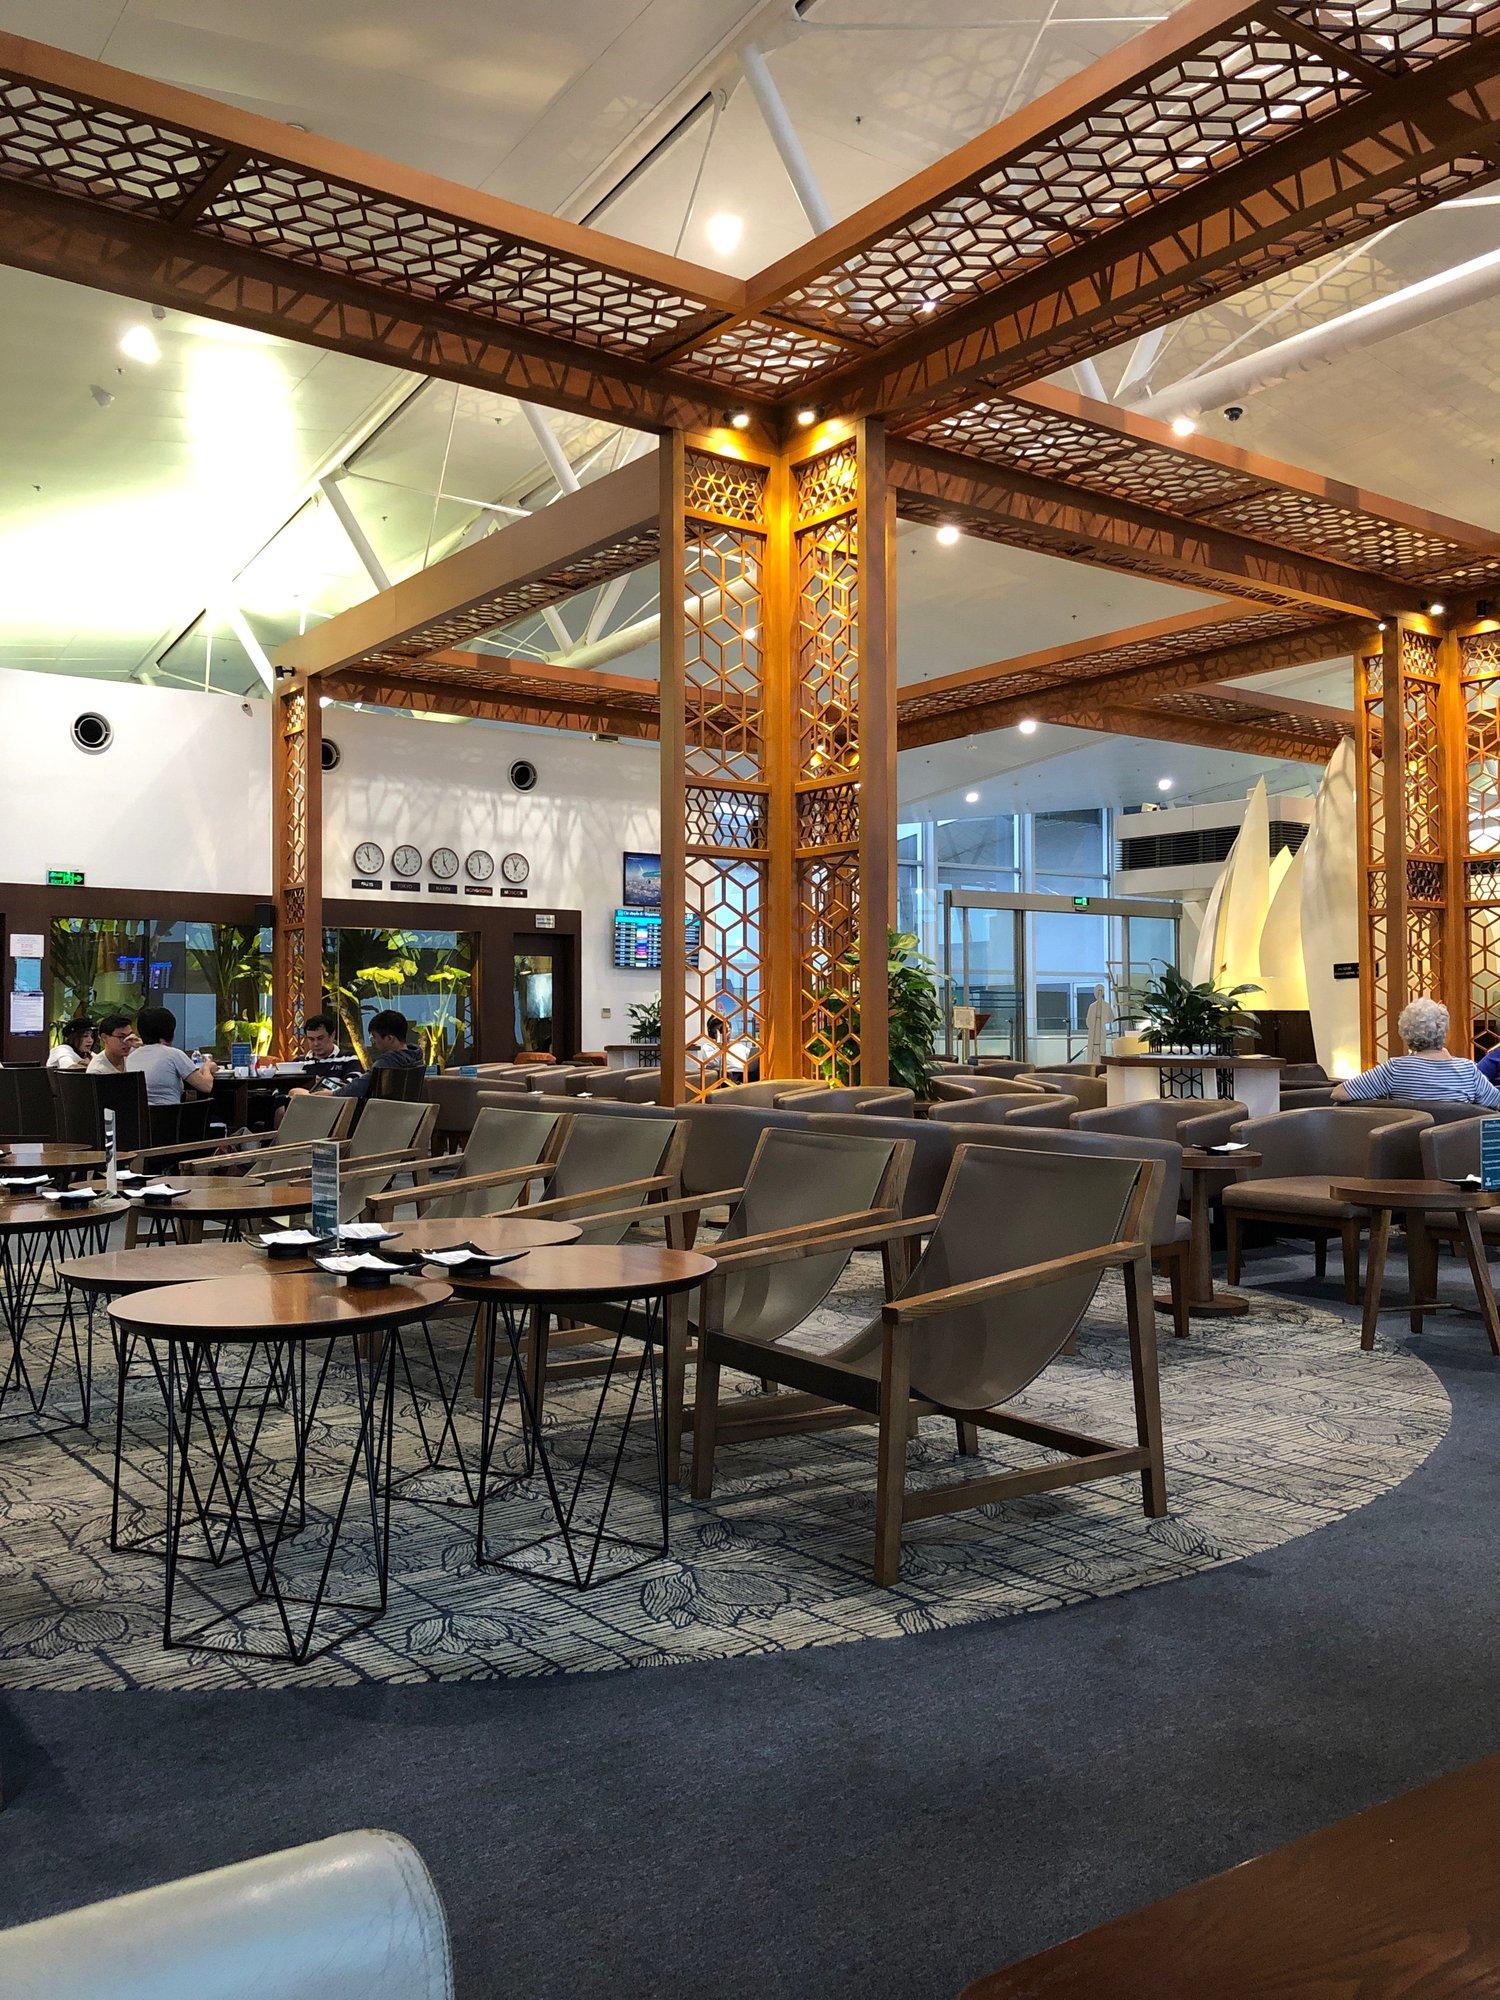 Vietnam Airlines Business Class Lounge image 5 of 16